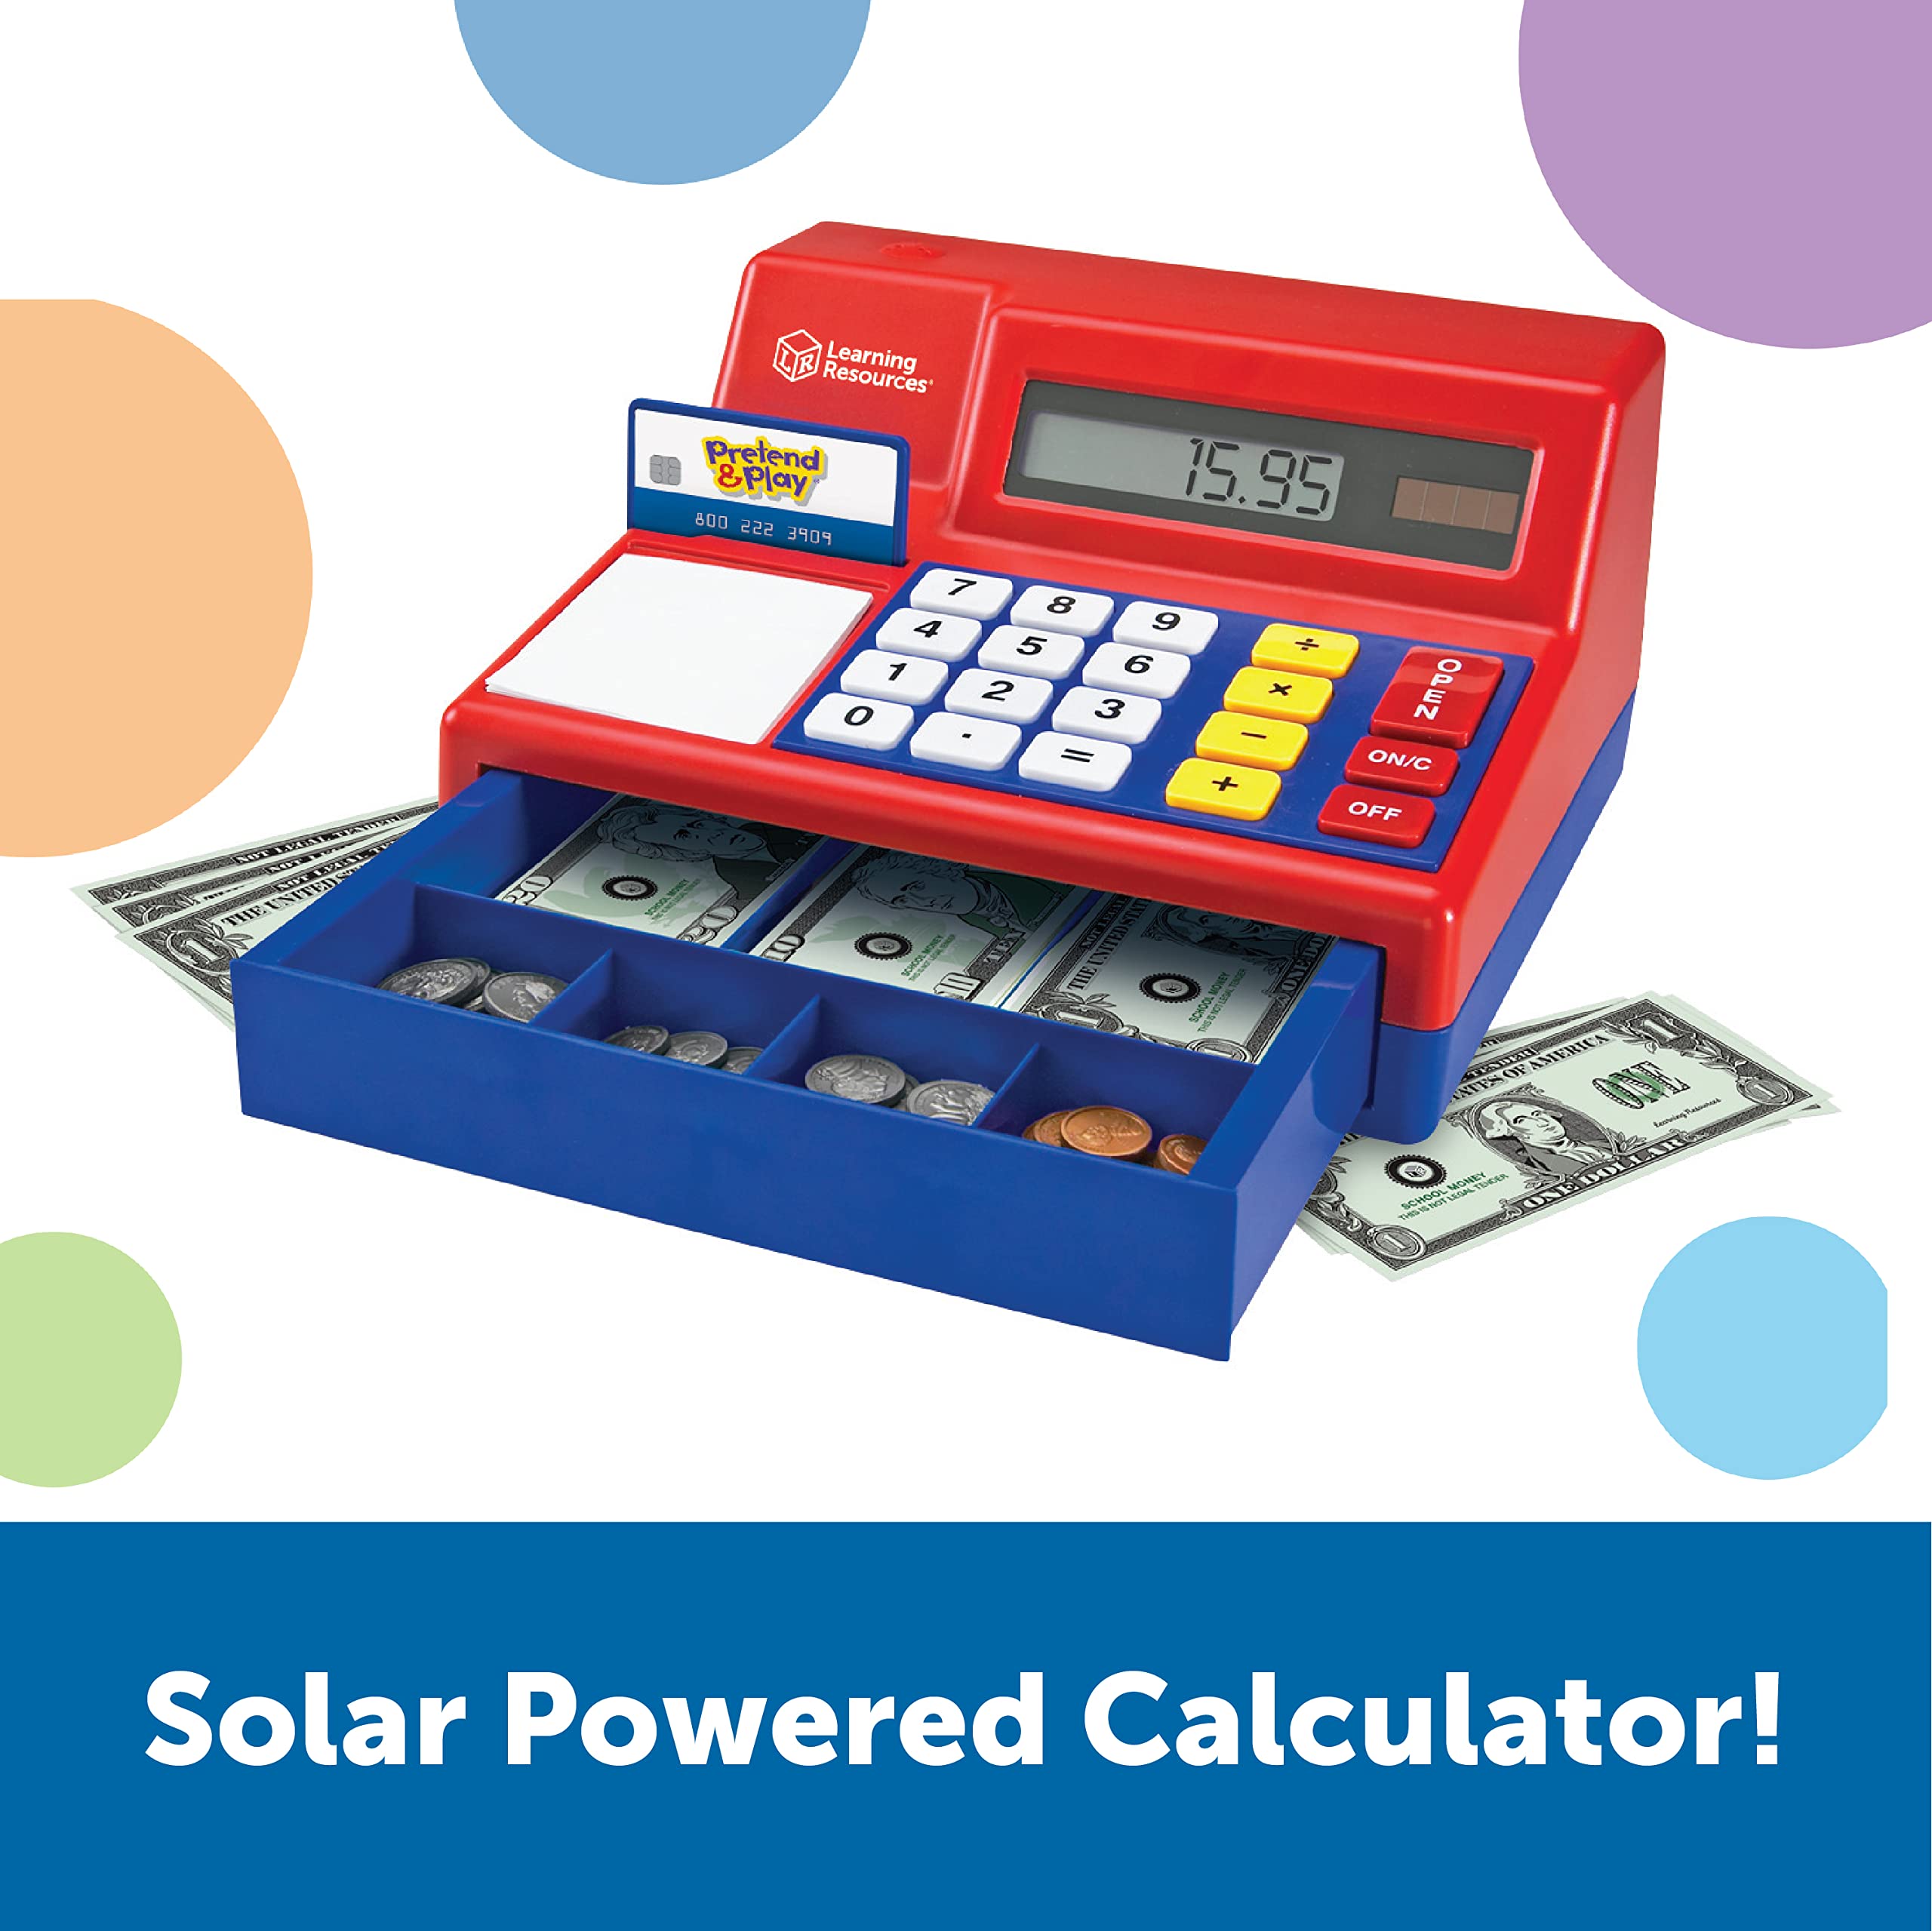 Learning Resources Pretend & Play Calculator Cash Register - 73 Pieces, Ages 3+ Develops Early Math Skills, Play Cash Register for Kids, Toy Cash Register, Play Money for Kids,Back to School